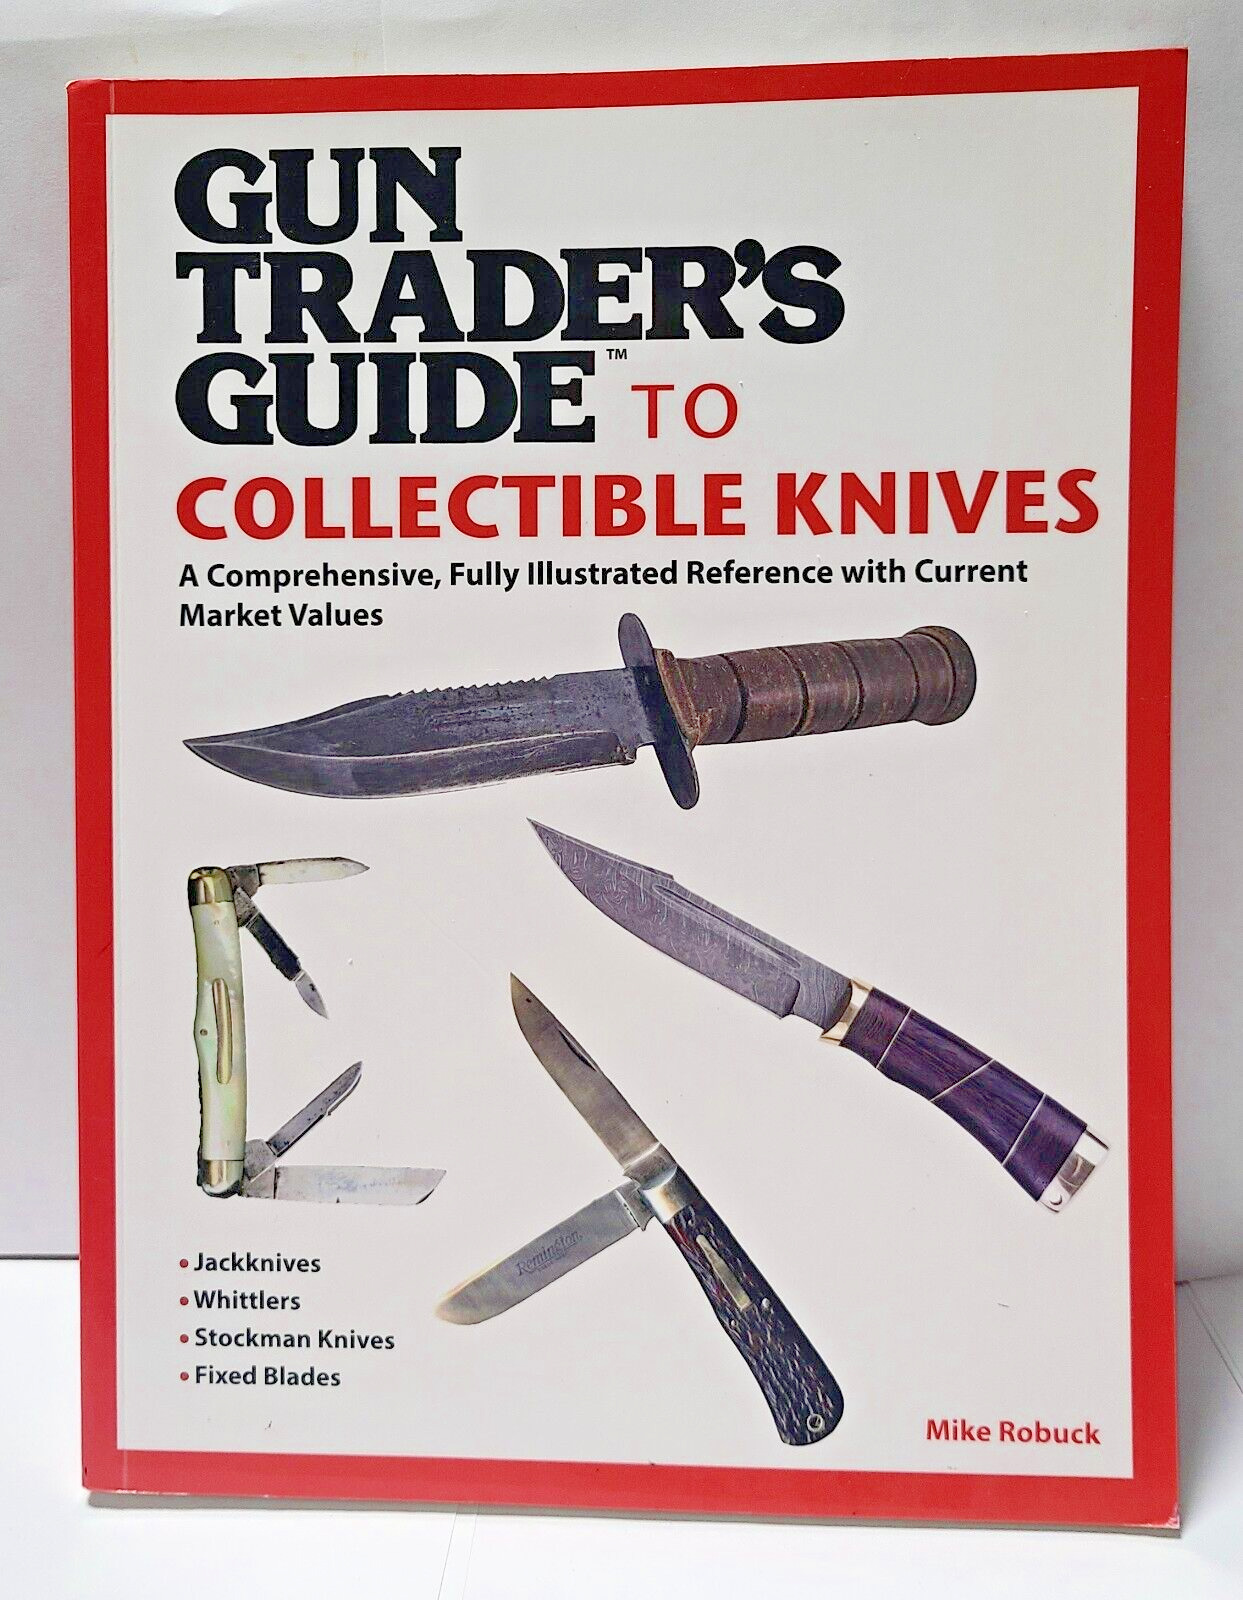 Gun Trader's Guide To Collectible Knives 2014 Mike Robuck softcover very good